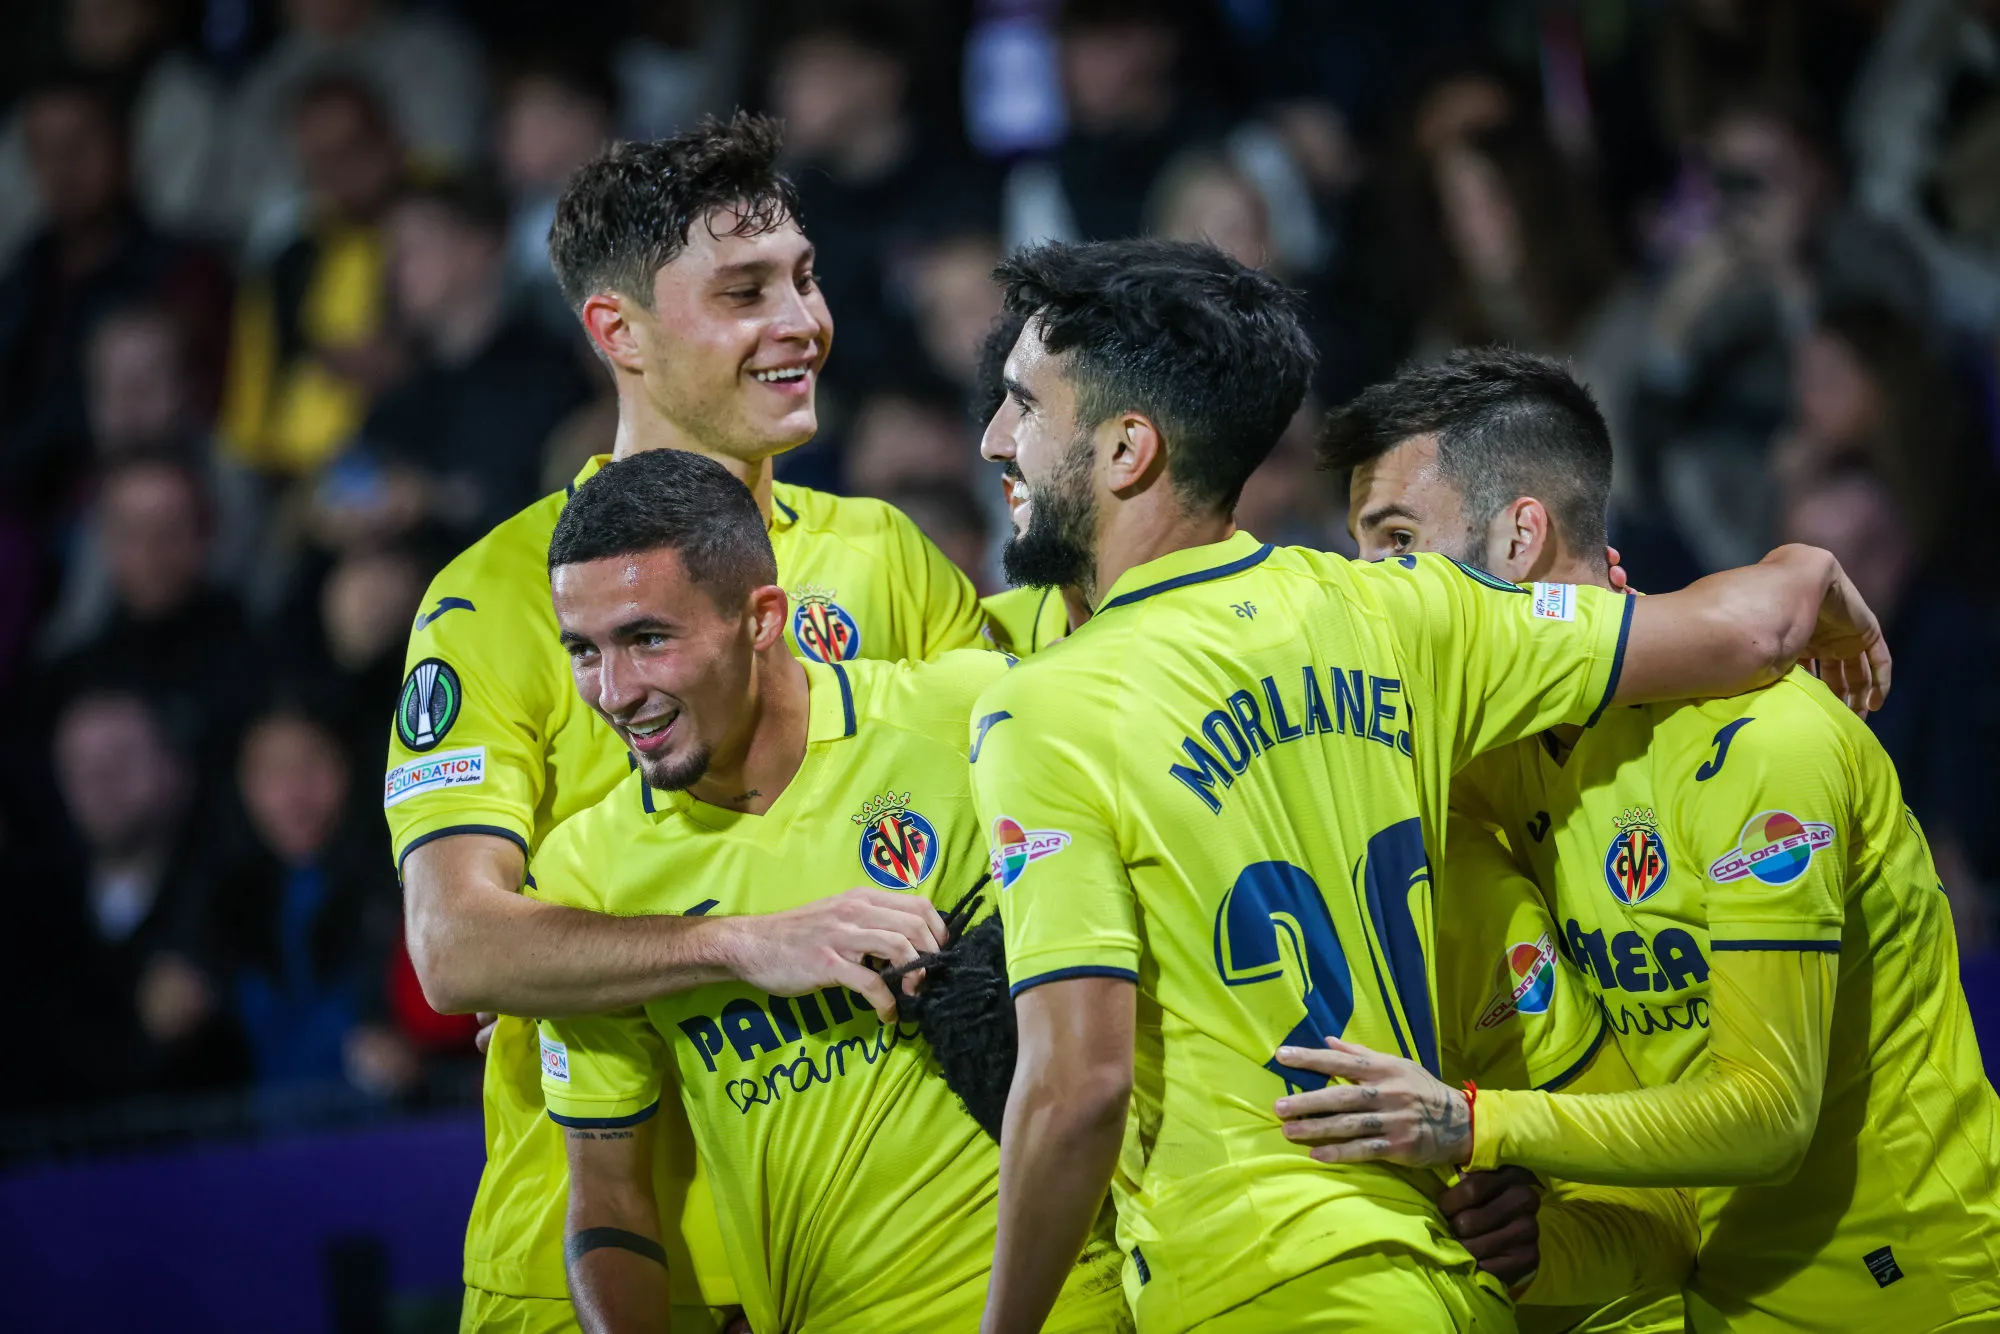 VIENNA,AUSTRIA,13.OCT.22 - SOCCER - UEFA Europa Conference League, group stage, FK Austria Wien vs Villarreal CF. Image shows the rejoicing of Villarreal.
Photo: GEPA pictures/ David Bitzan - Photo by Icon sport